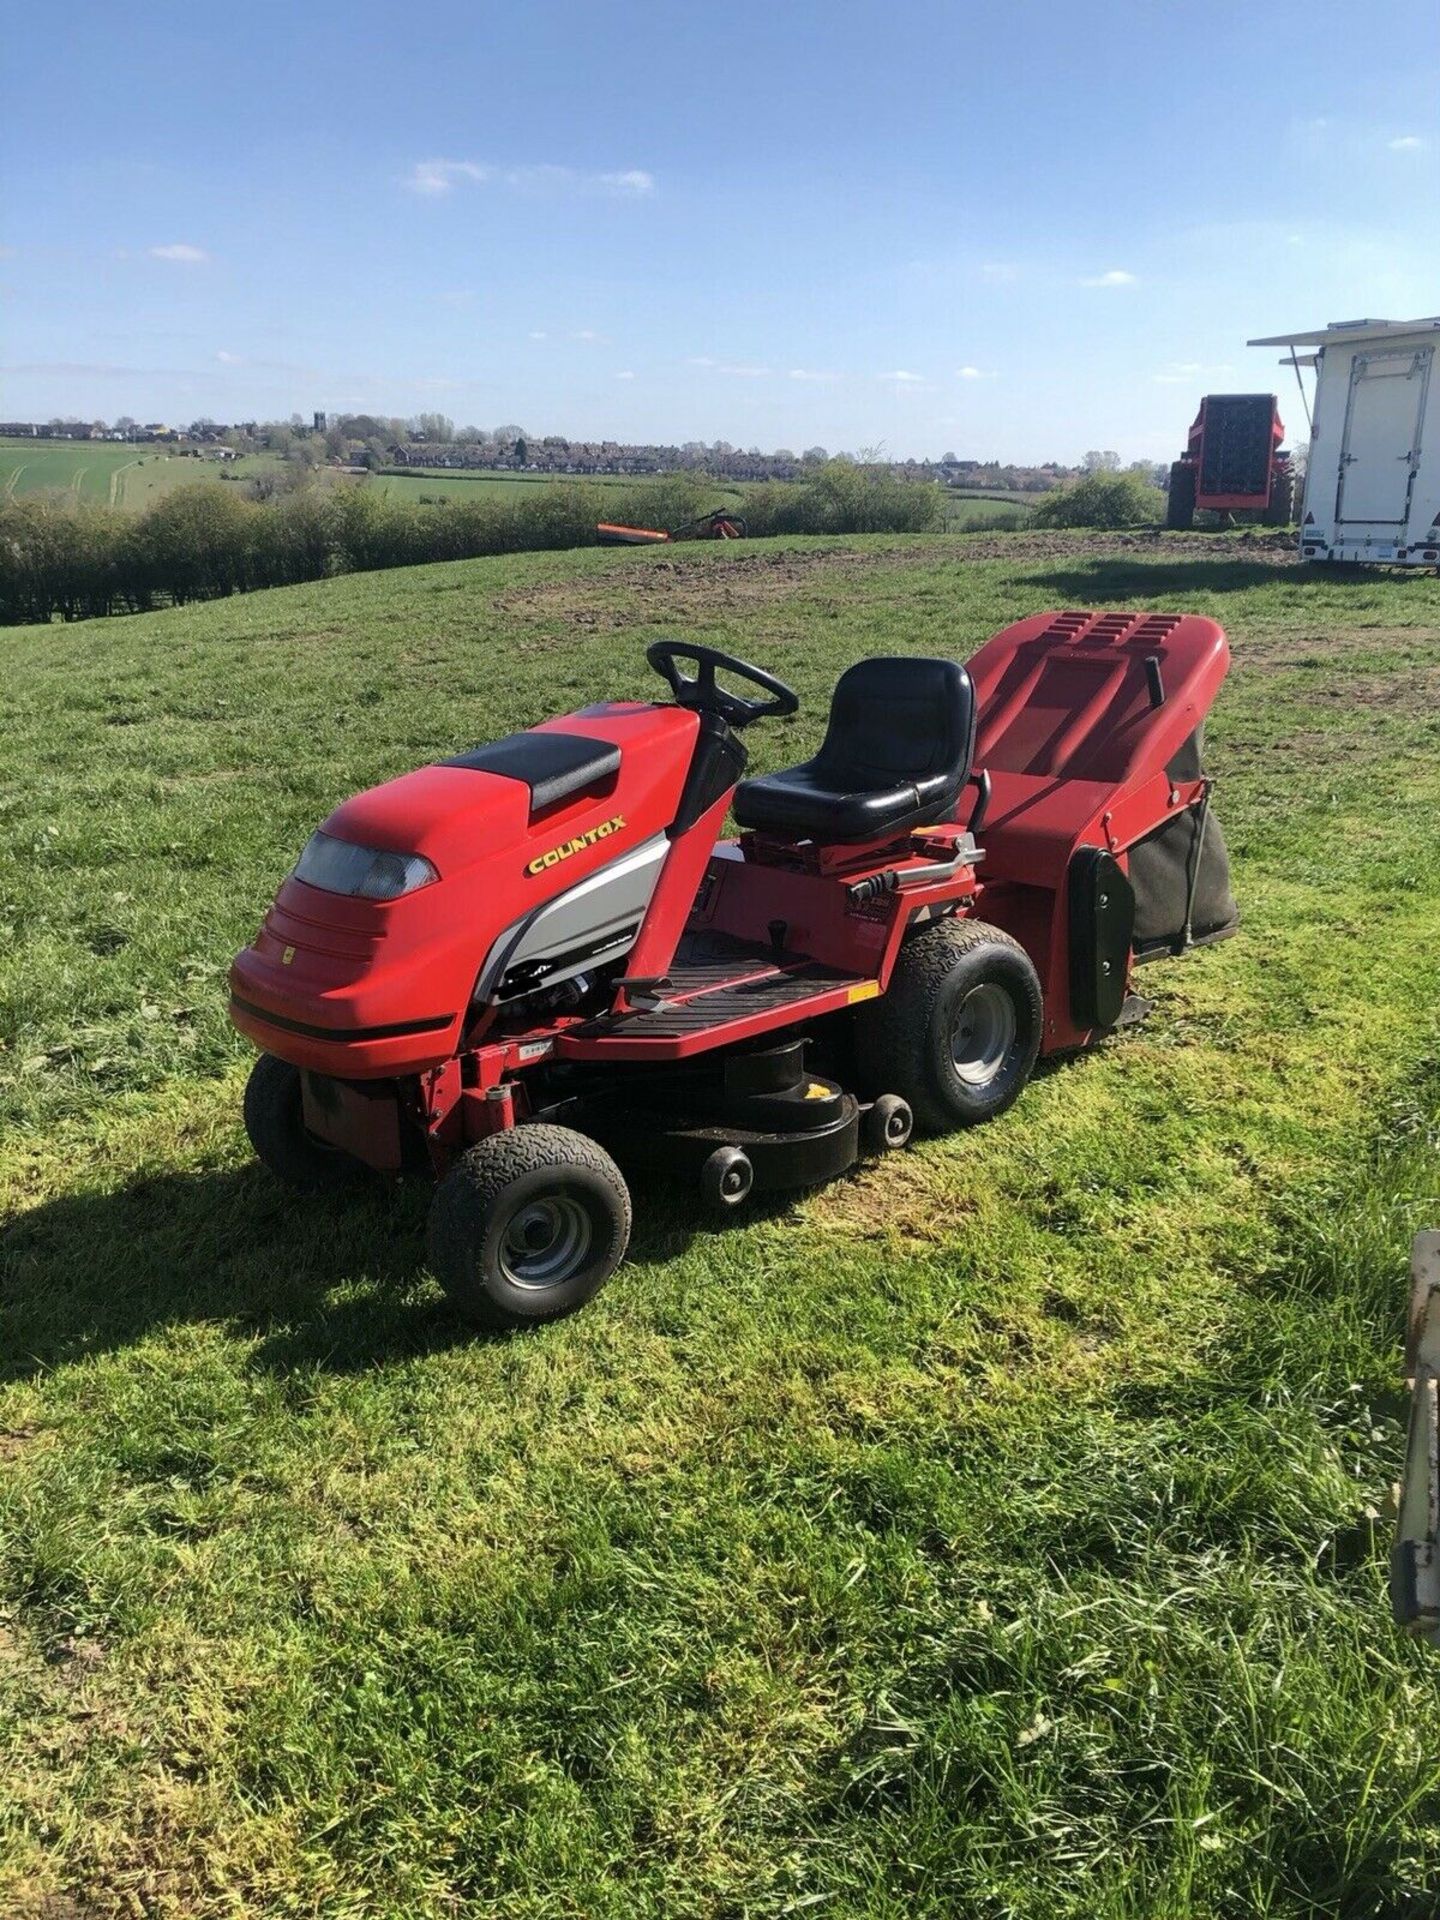 LOT WITHDRAWN Countax C800H Ride On Lawn Mower